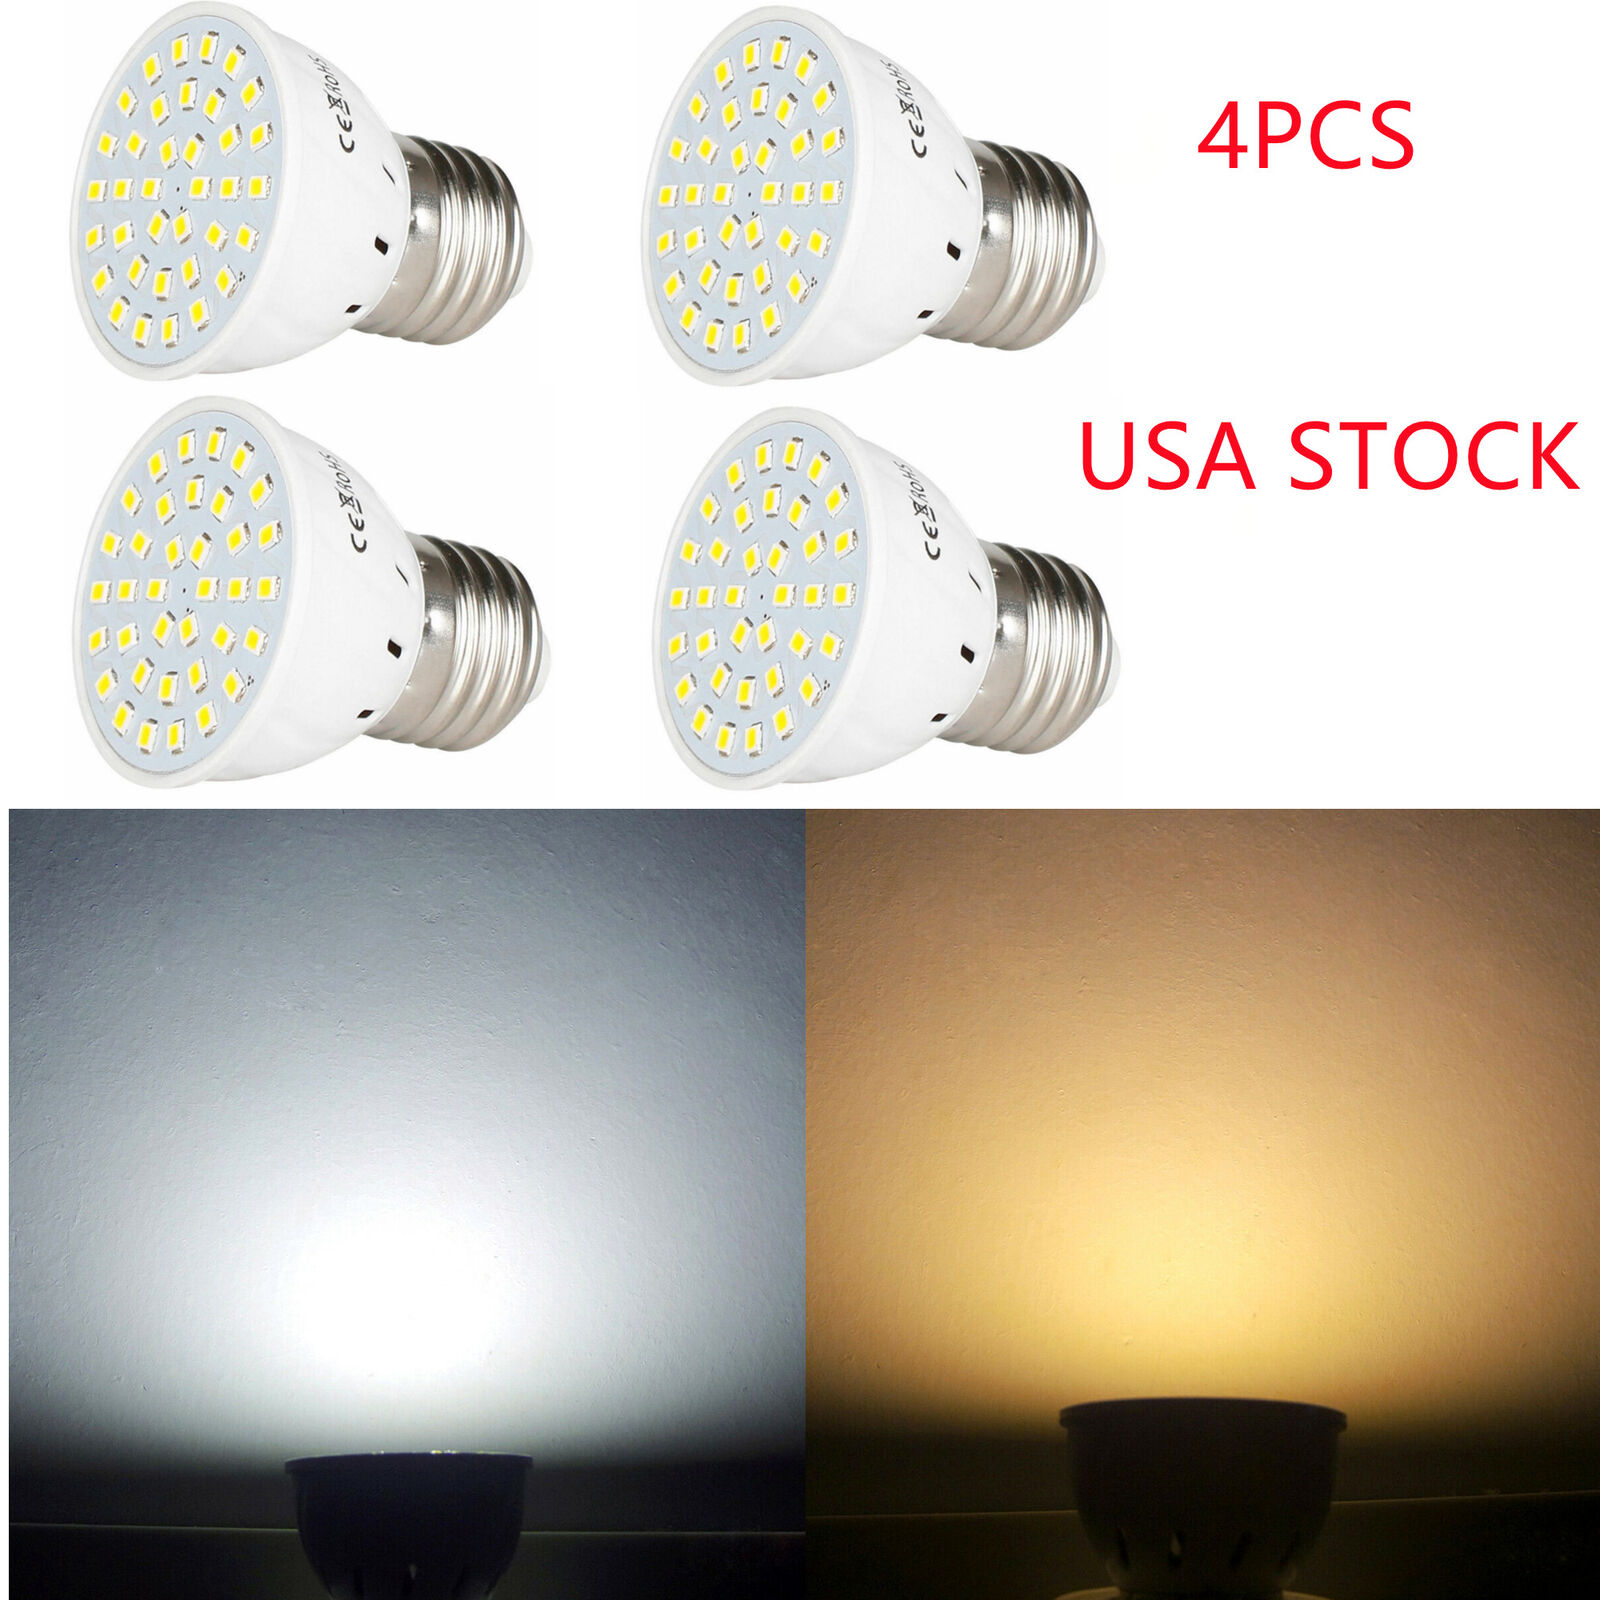 Need Brighter Illumination In Hard-To-Reach Places: 12 Volt GU10 LED Bulbs That Shine